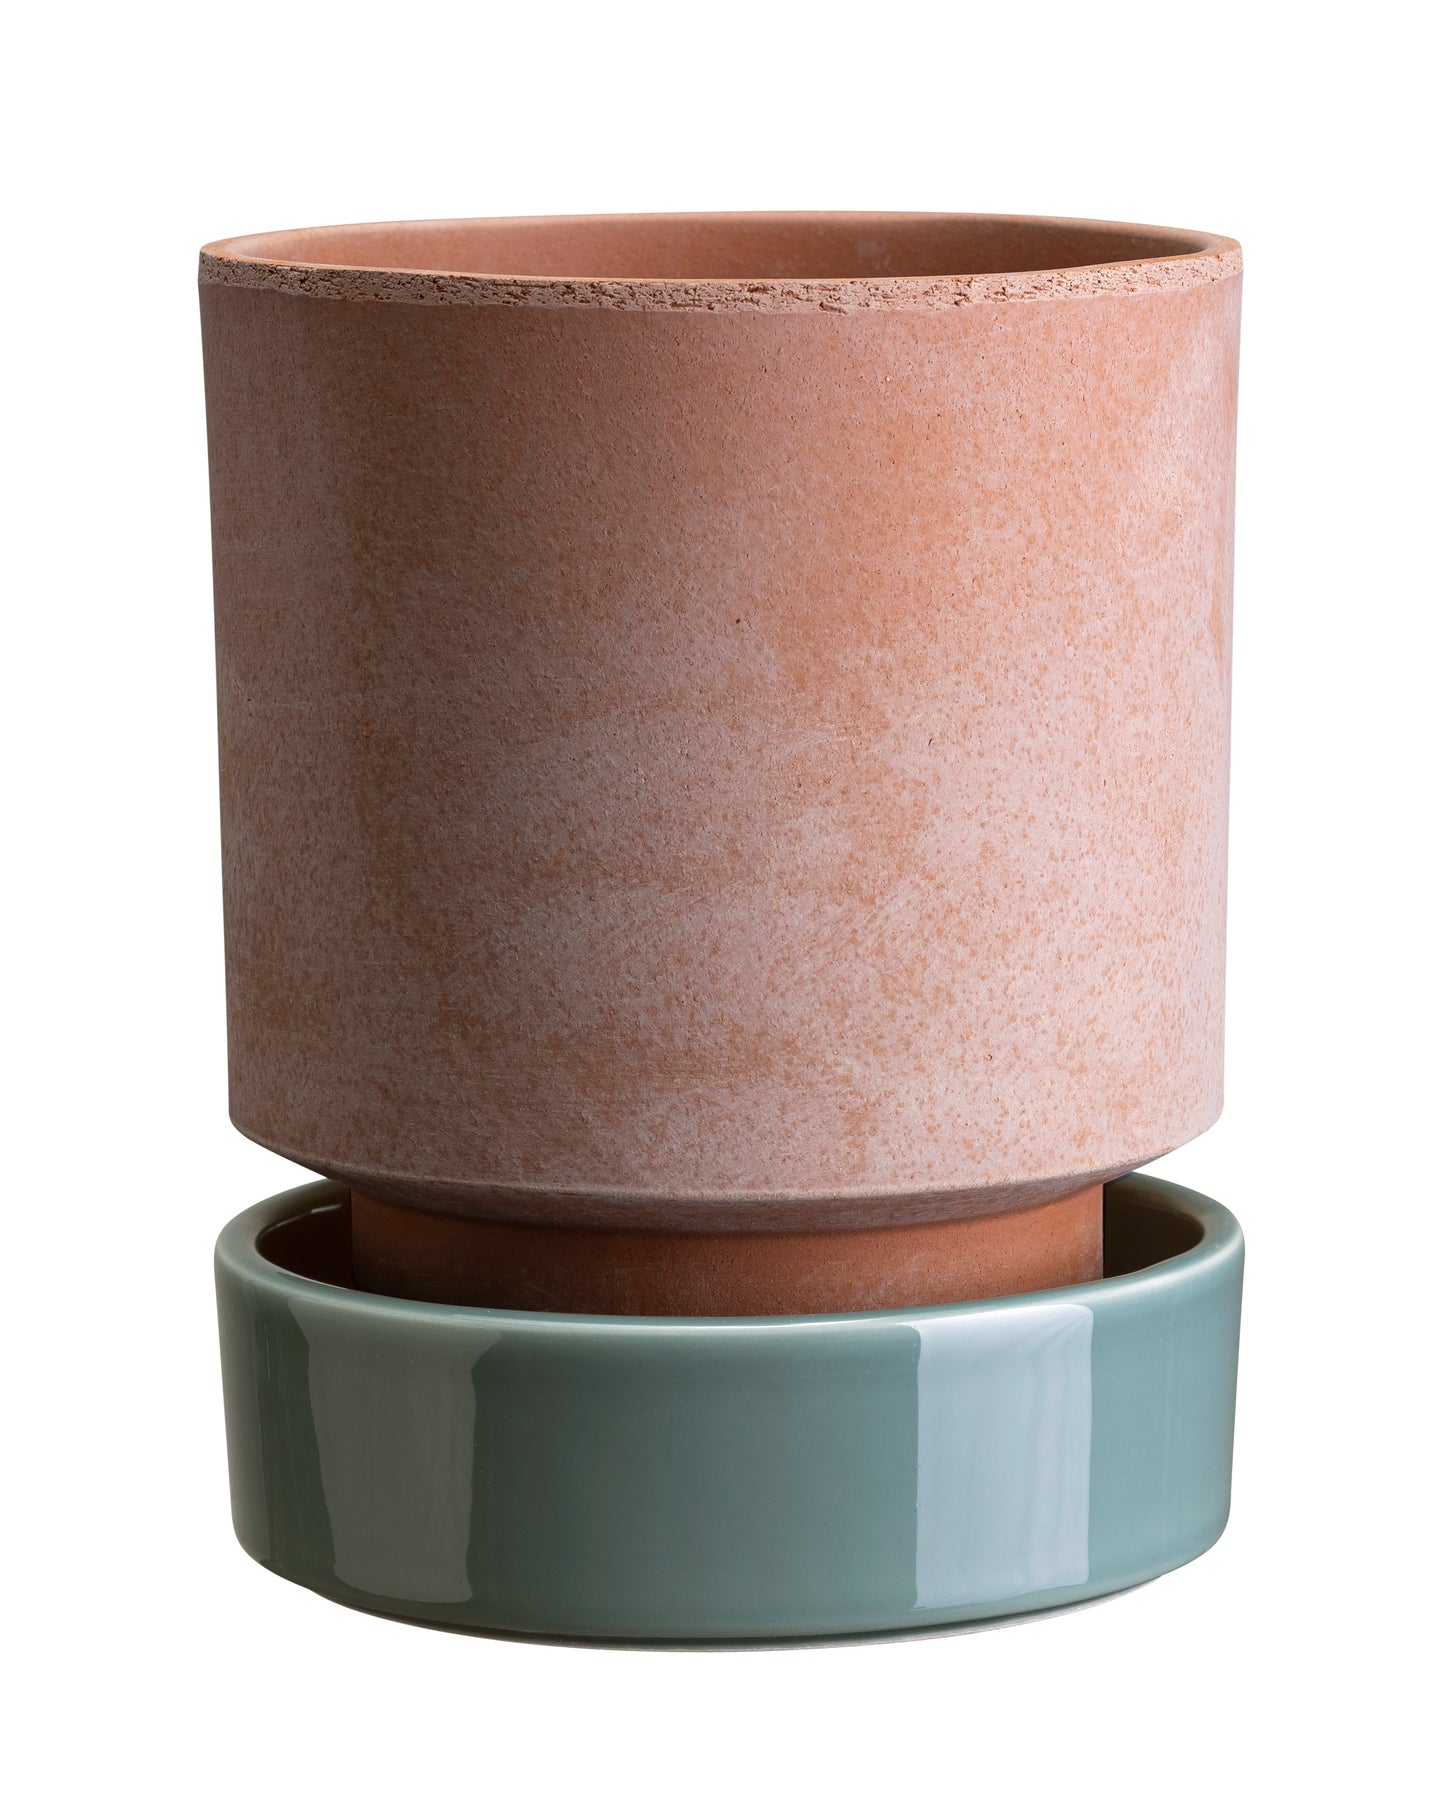 Hoff Pot in Rose Clay Ø14cm with green glazed saucer